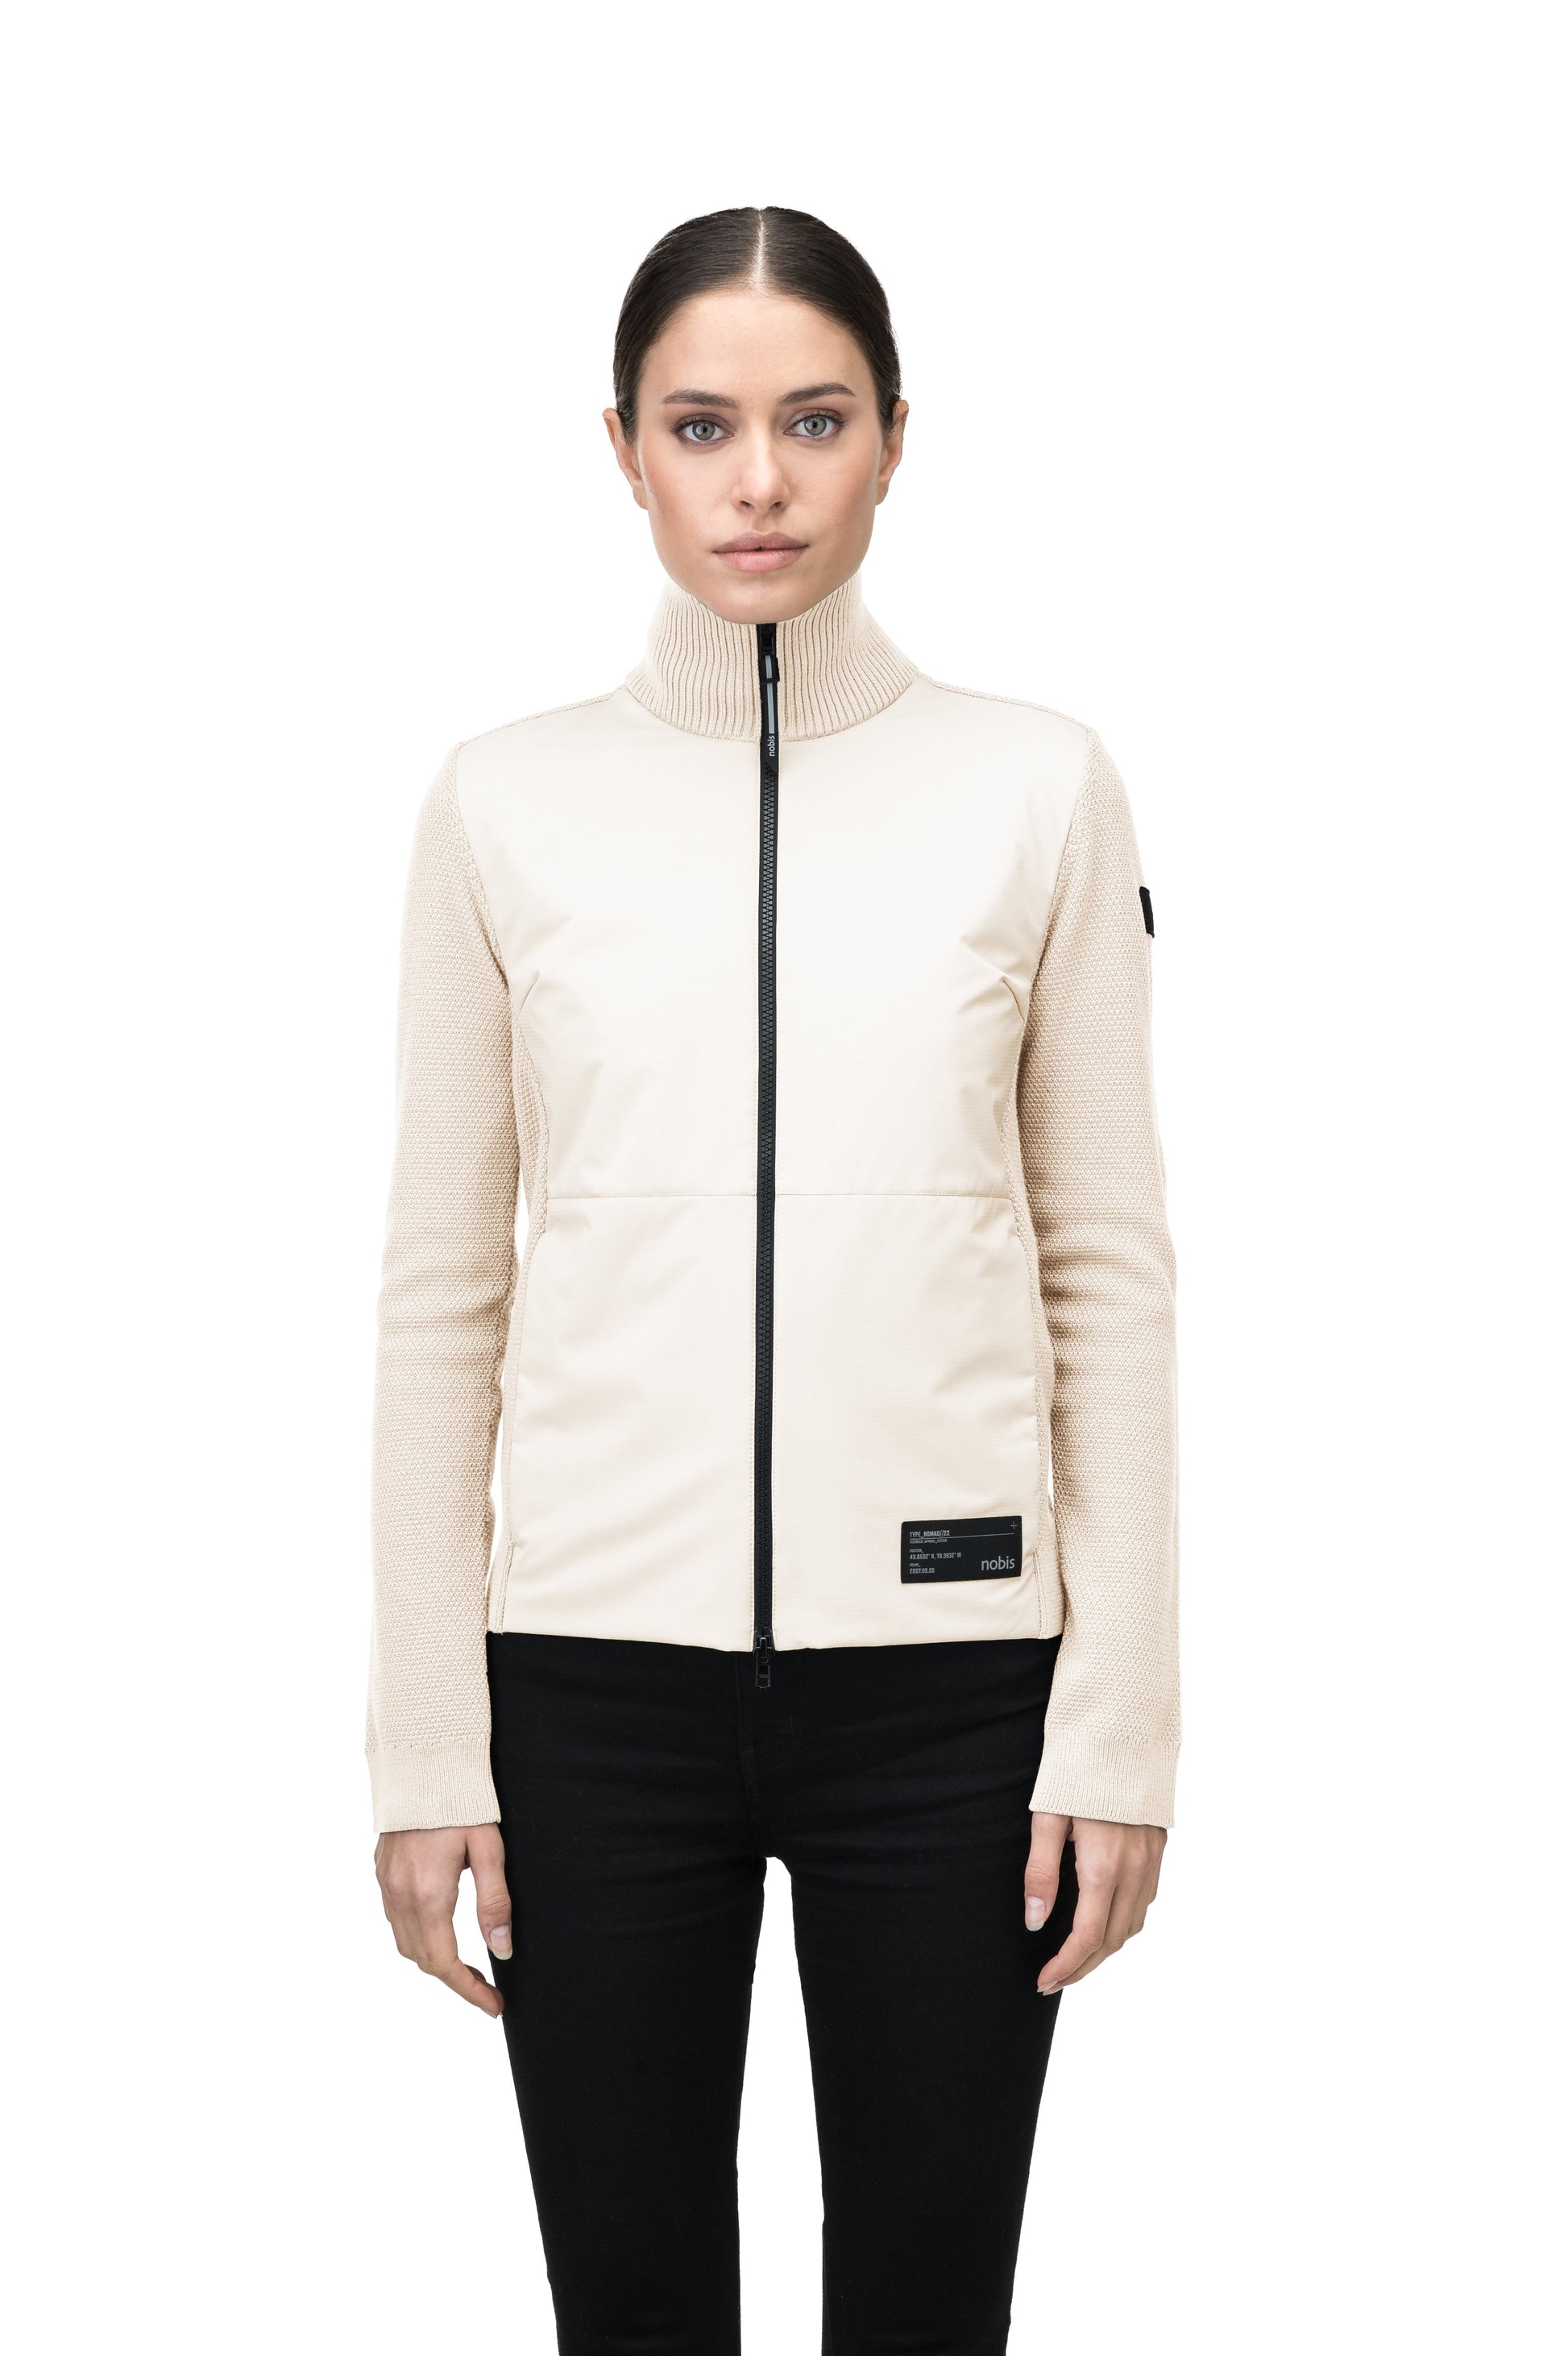 Evo Ladies Performance Full Zip Sweater in hip length, Primaloft Gold Insulation Active+, Merion wool knit collar, sleeves, back, and cuffs, two-way front zipper, and hidden waist pockets, in Chalk